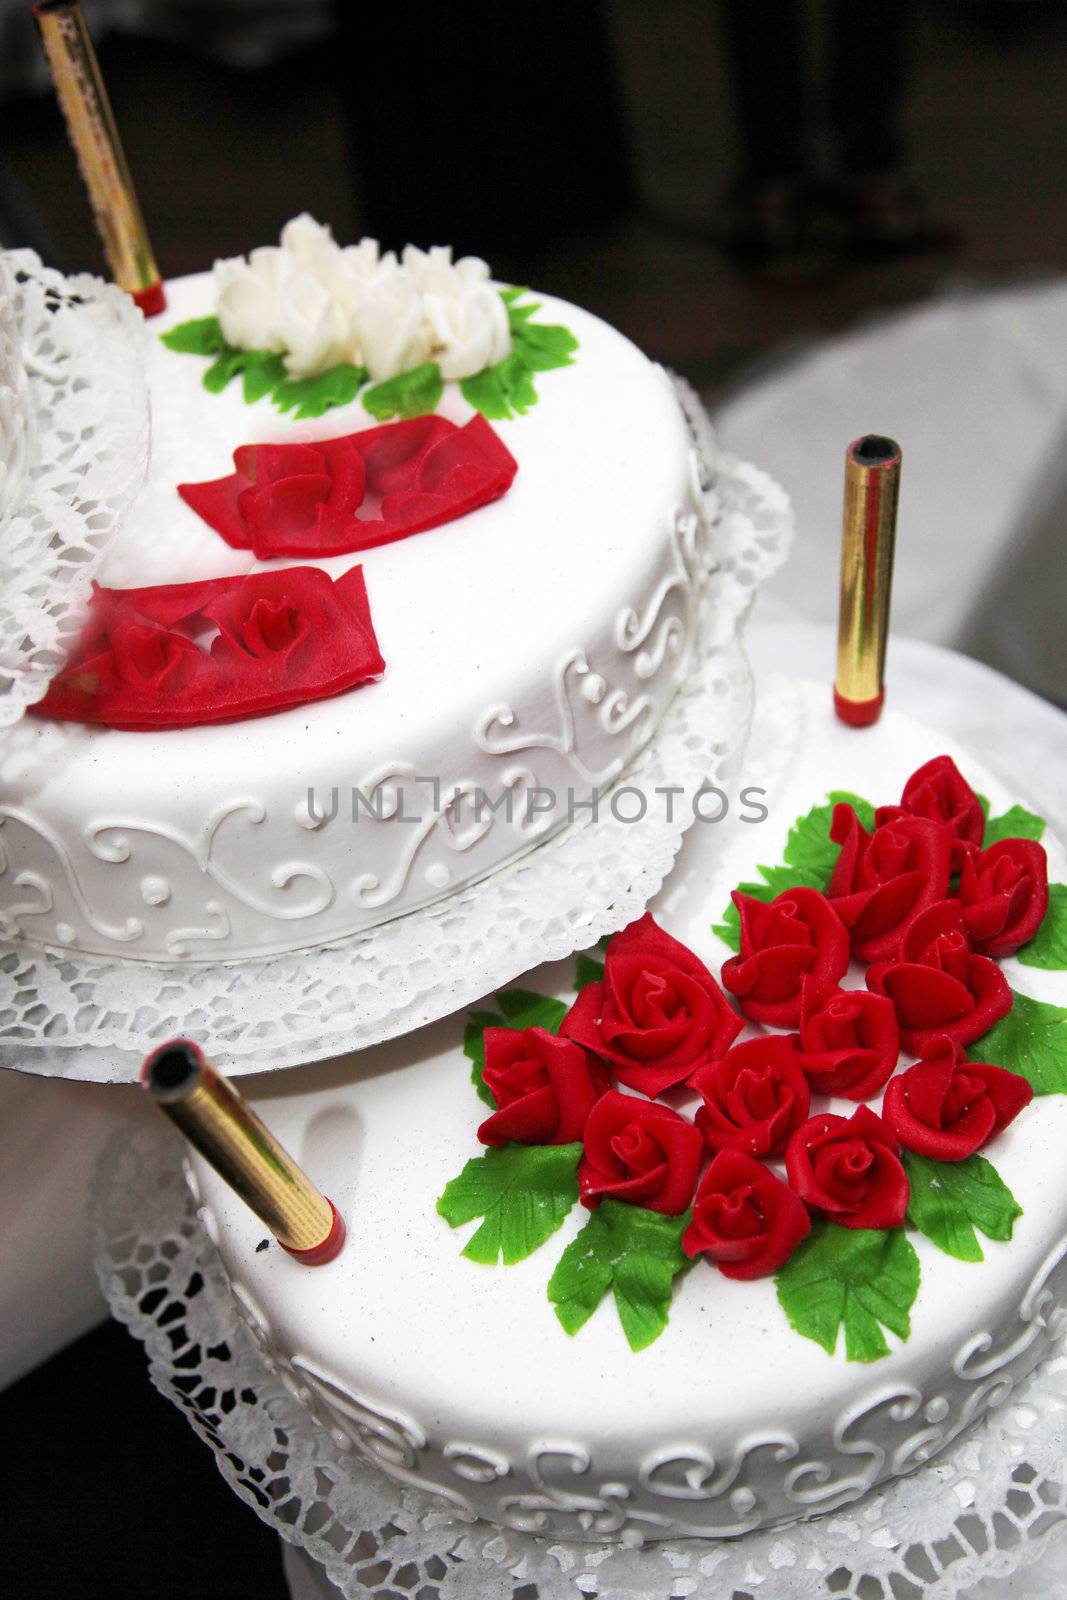 Decorated wedding cake with red roses by Farina6000